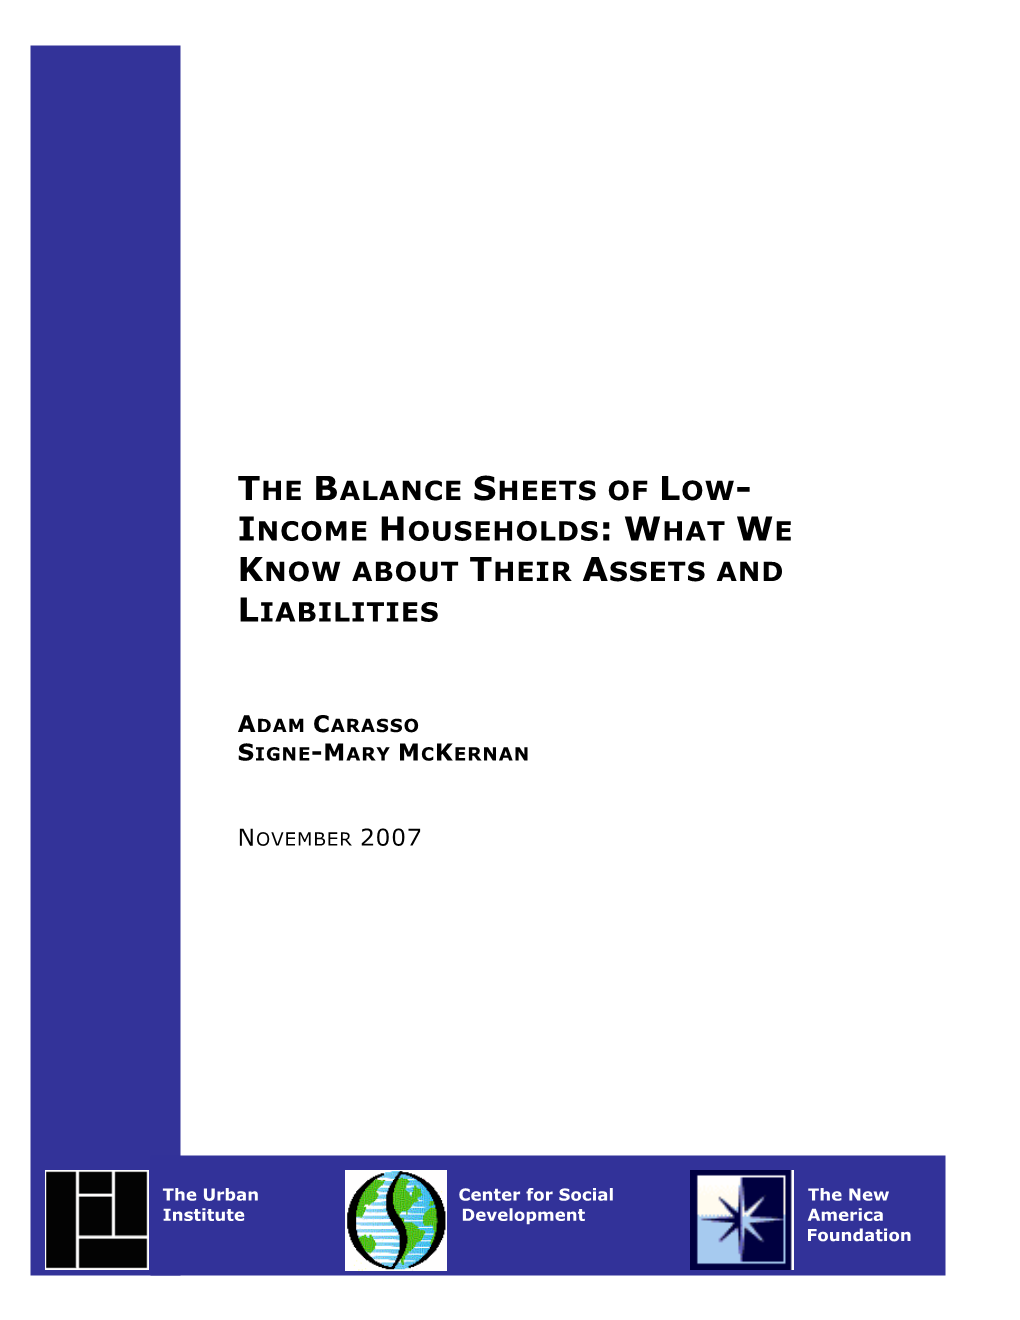 The Balance Sheets of Low-Income Households: What We Know About Their Assets and Liabilities